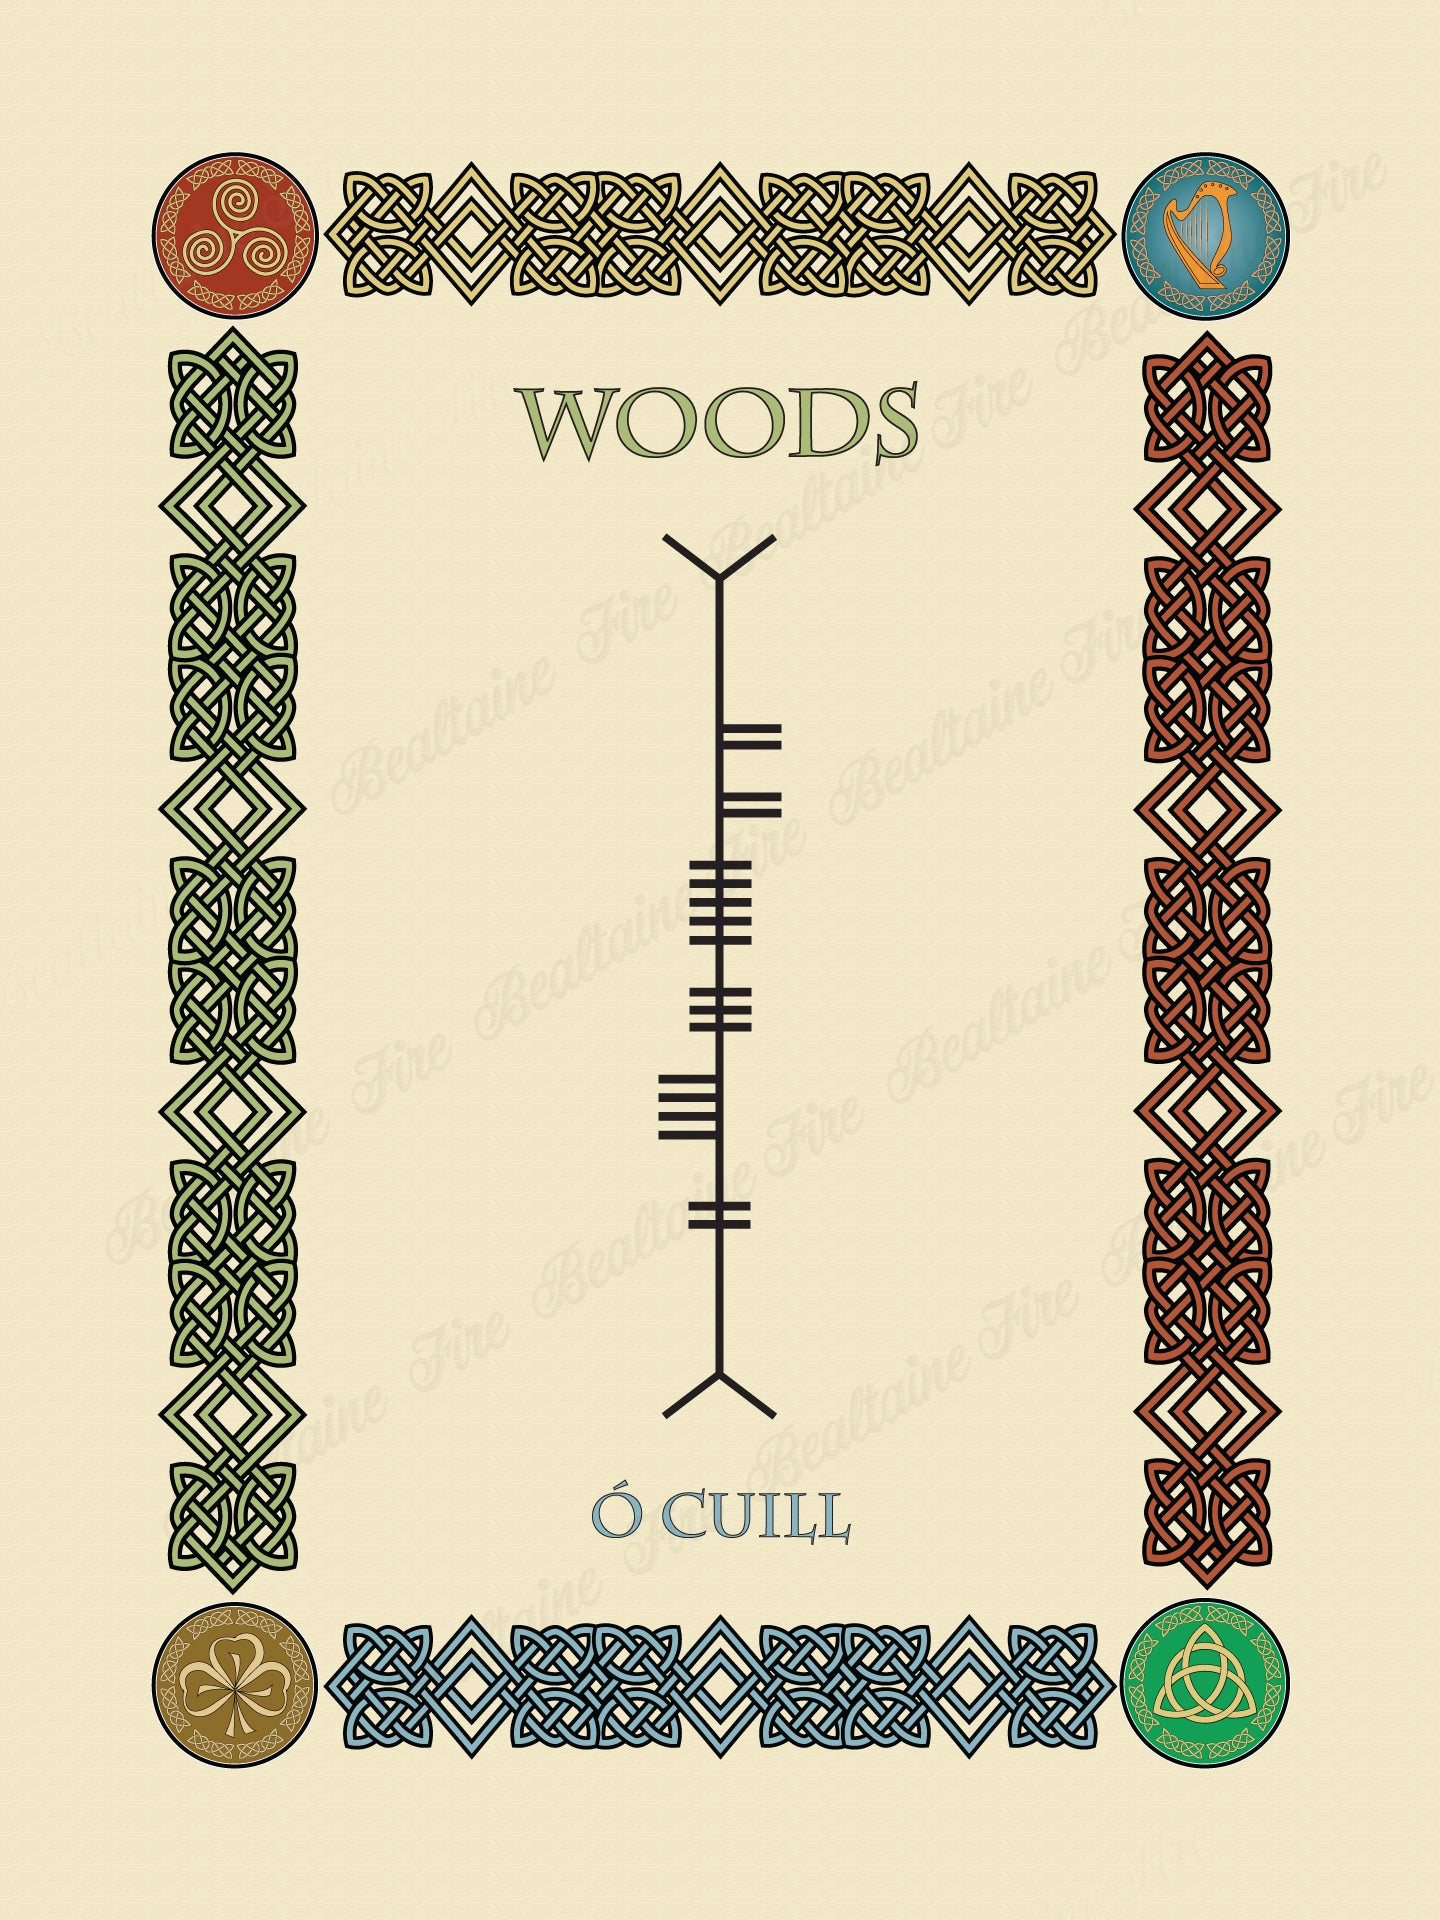 Woods in Old Irish and Ogham - PDF Download